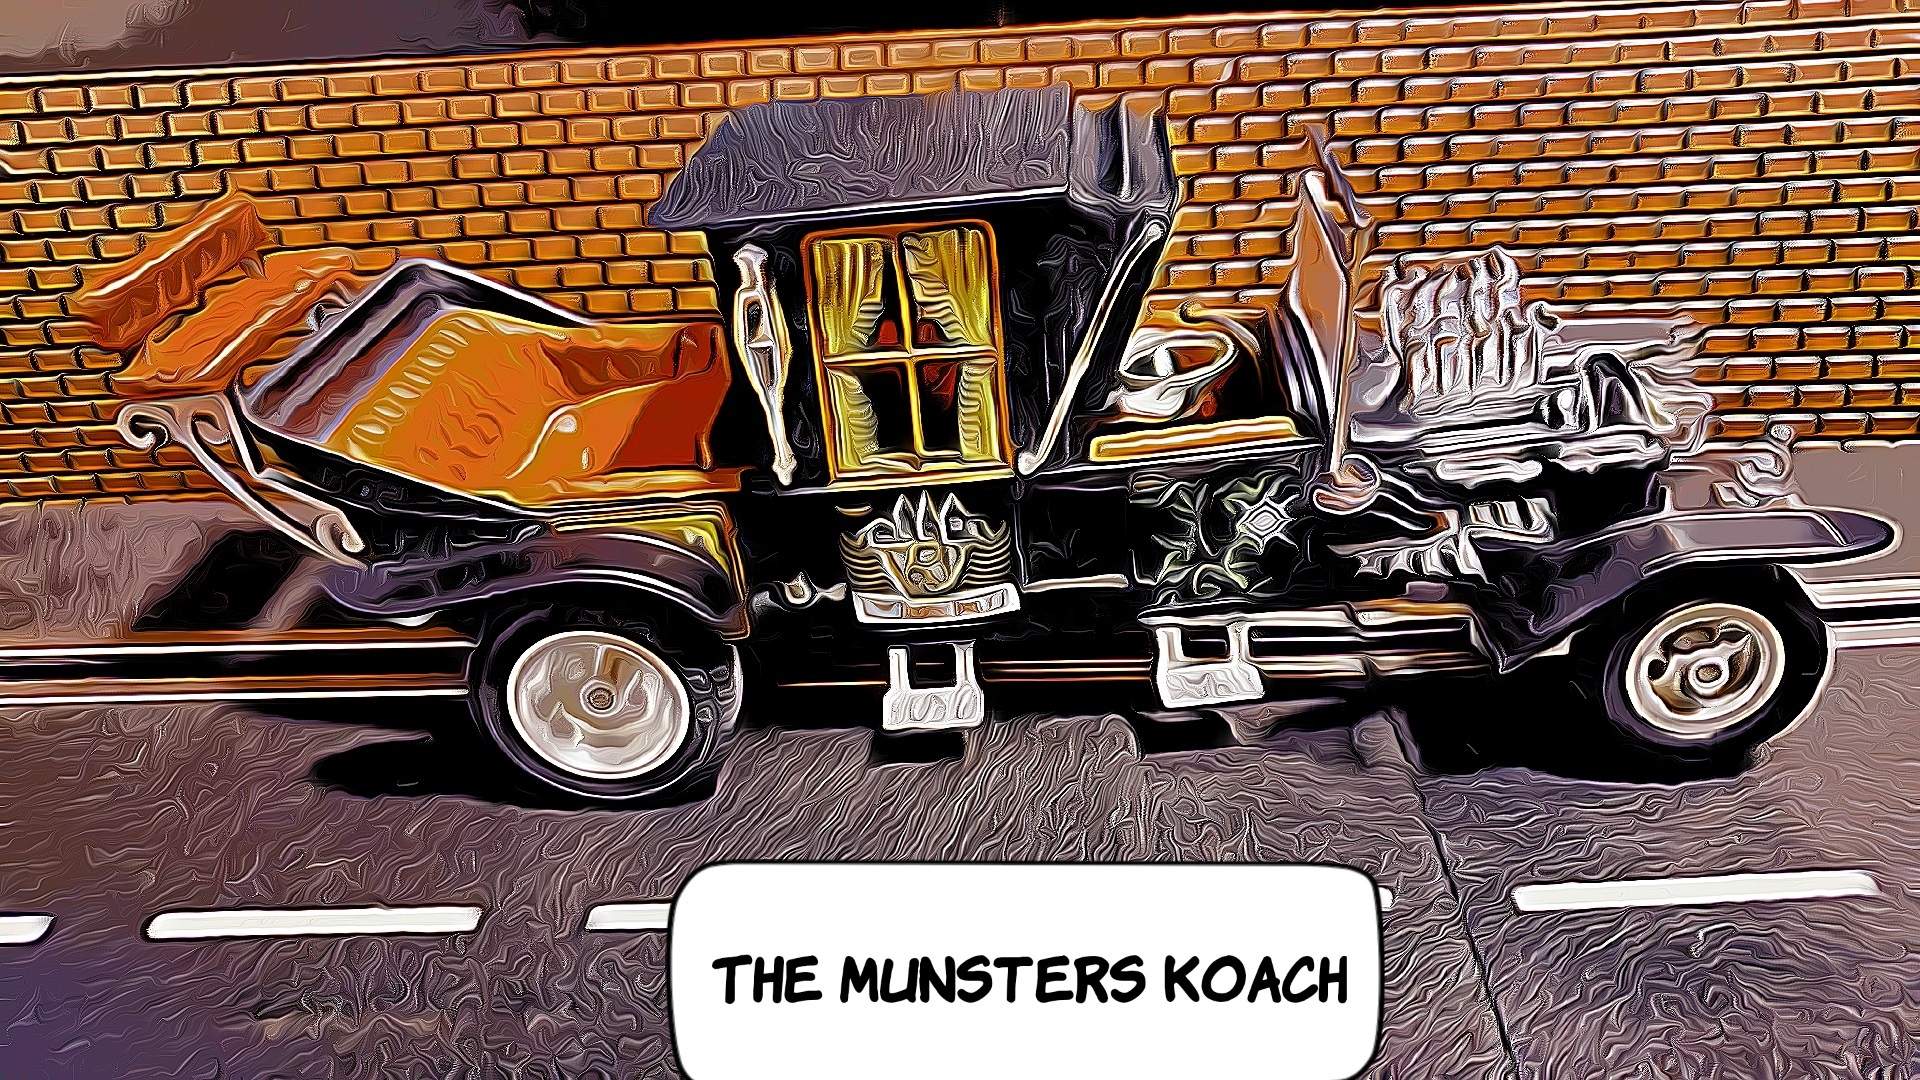 * SOLD 06-09-23 * * SALE * The Munster’s, Munster Koach Slot Car 1/24 Scale with Driver